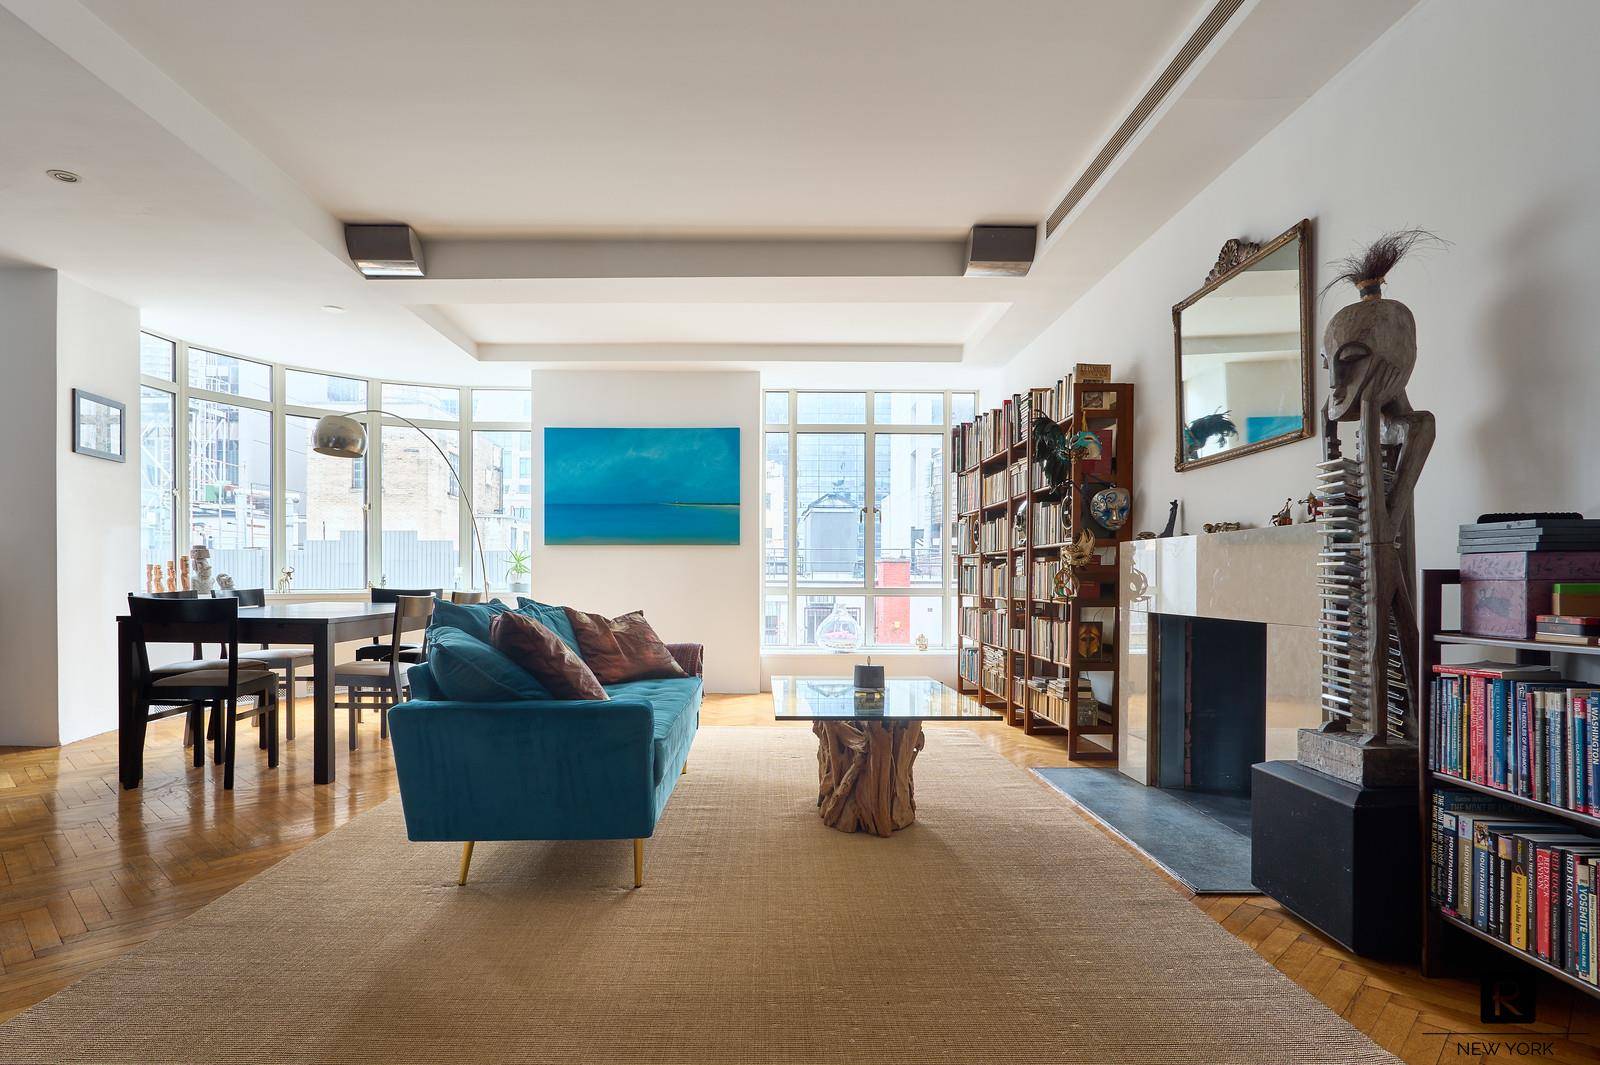 This incredibly spacious and bright 3 bedroom 3 bathroom in the iconic landmarked Rockefeller Building is a combination of 2 apartments.